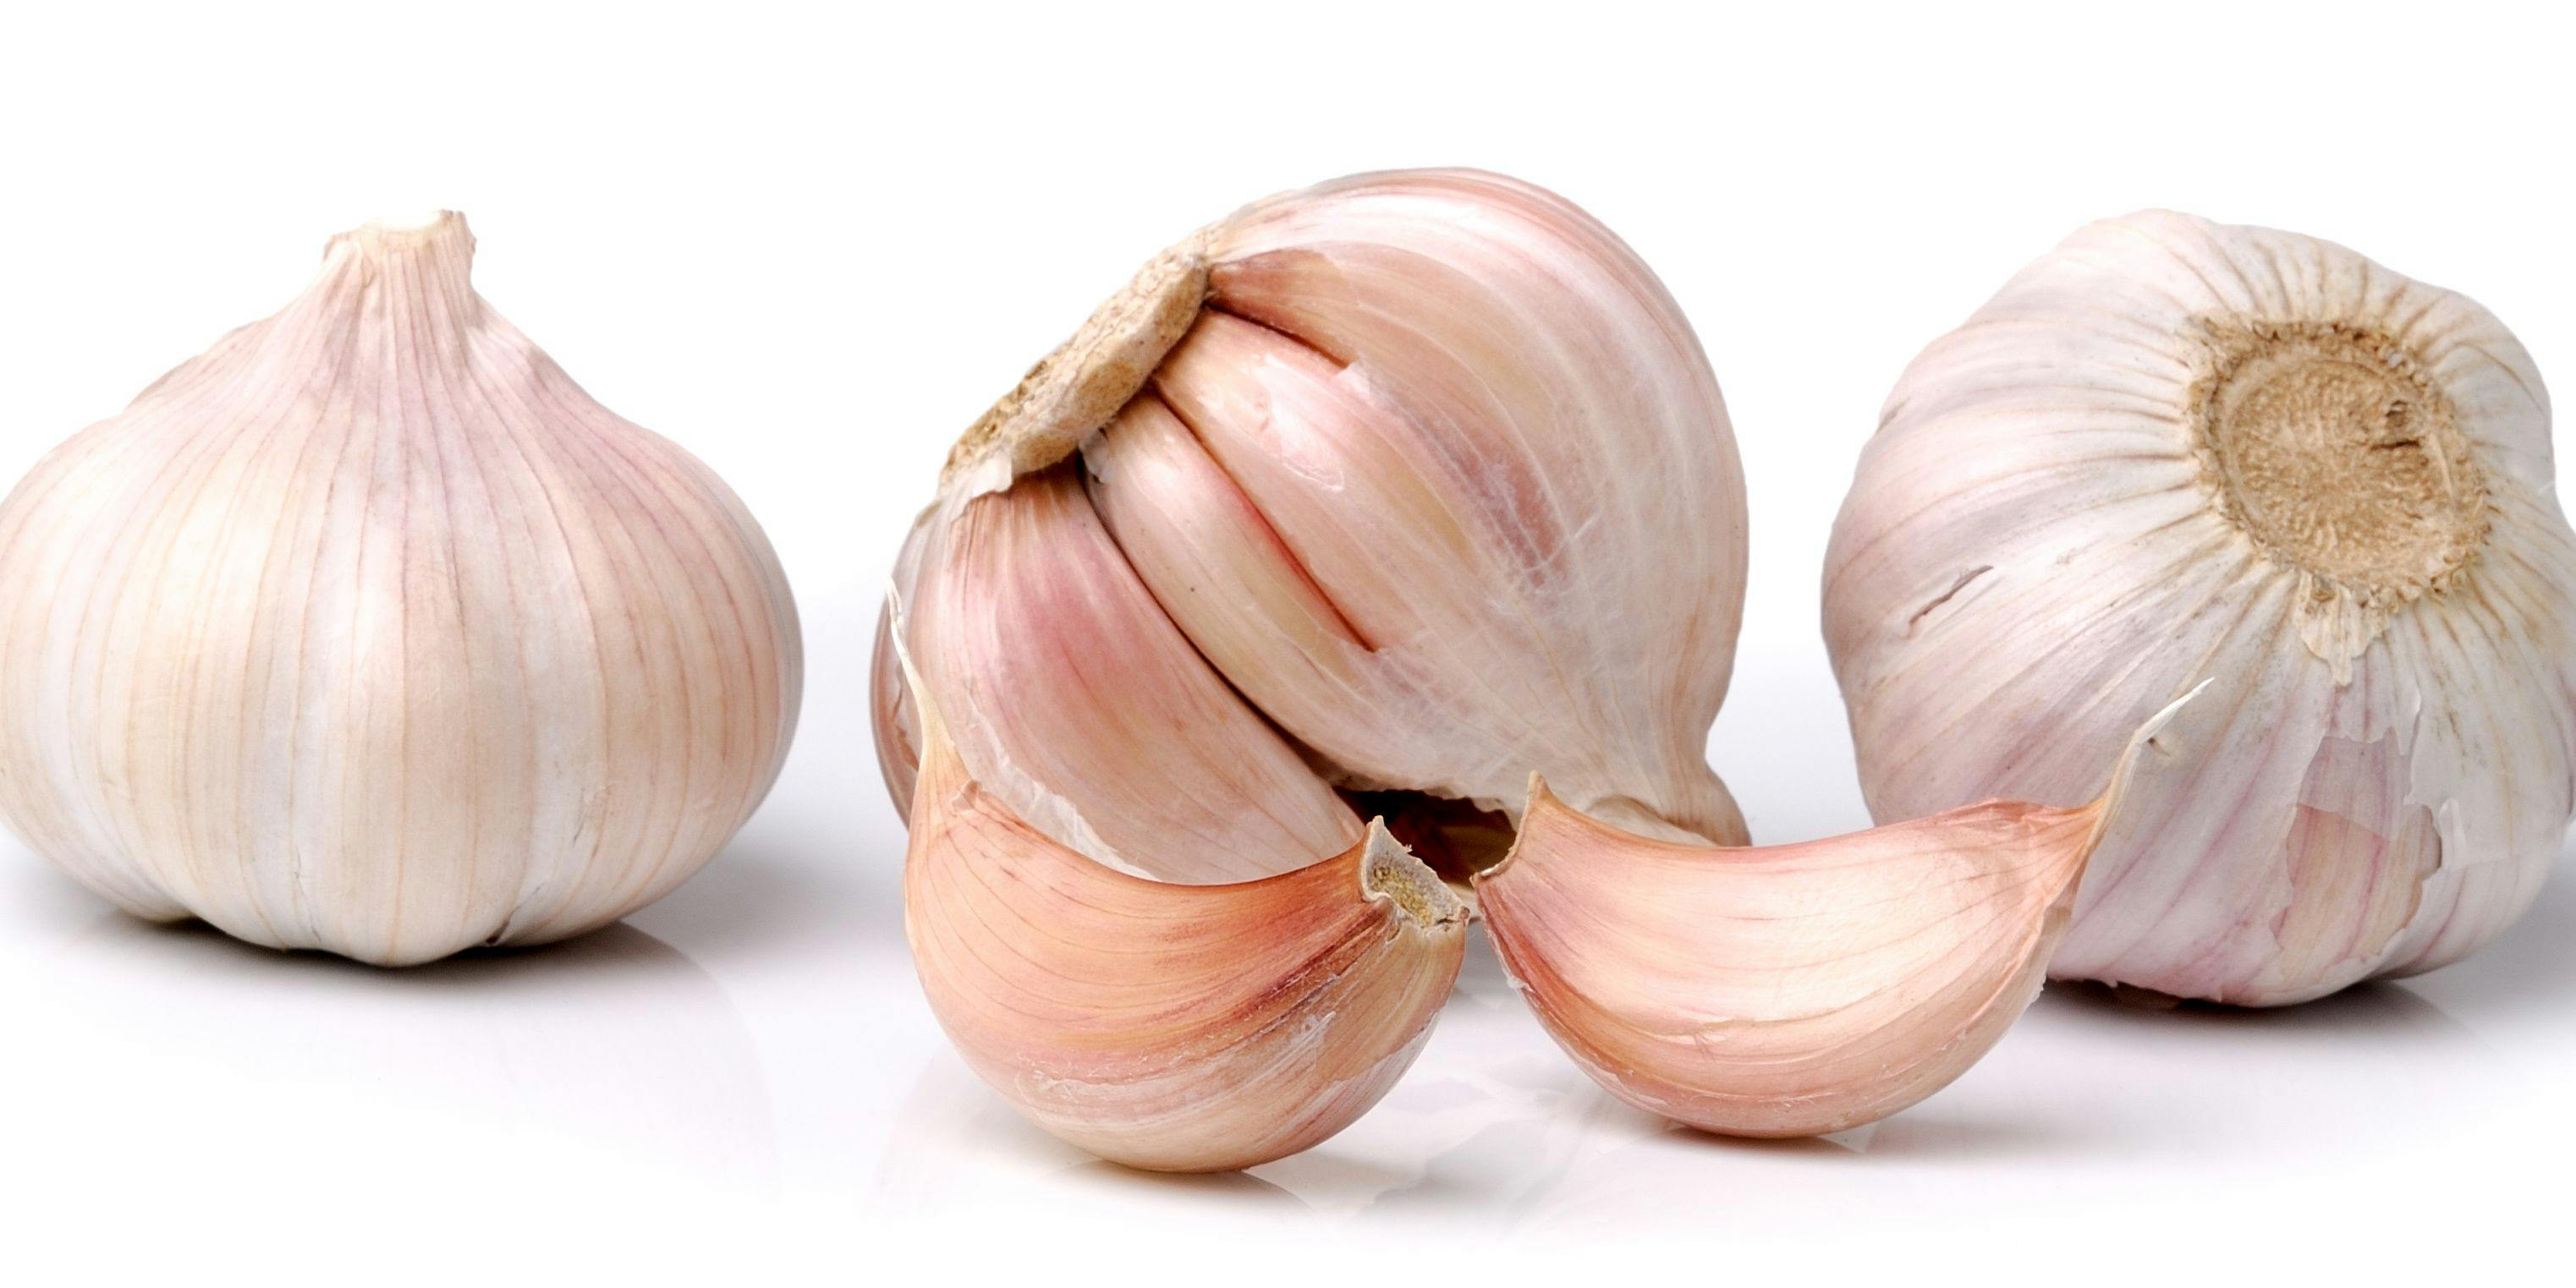 Can Garlic Cure the Common Cold?